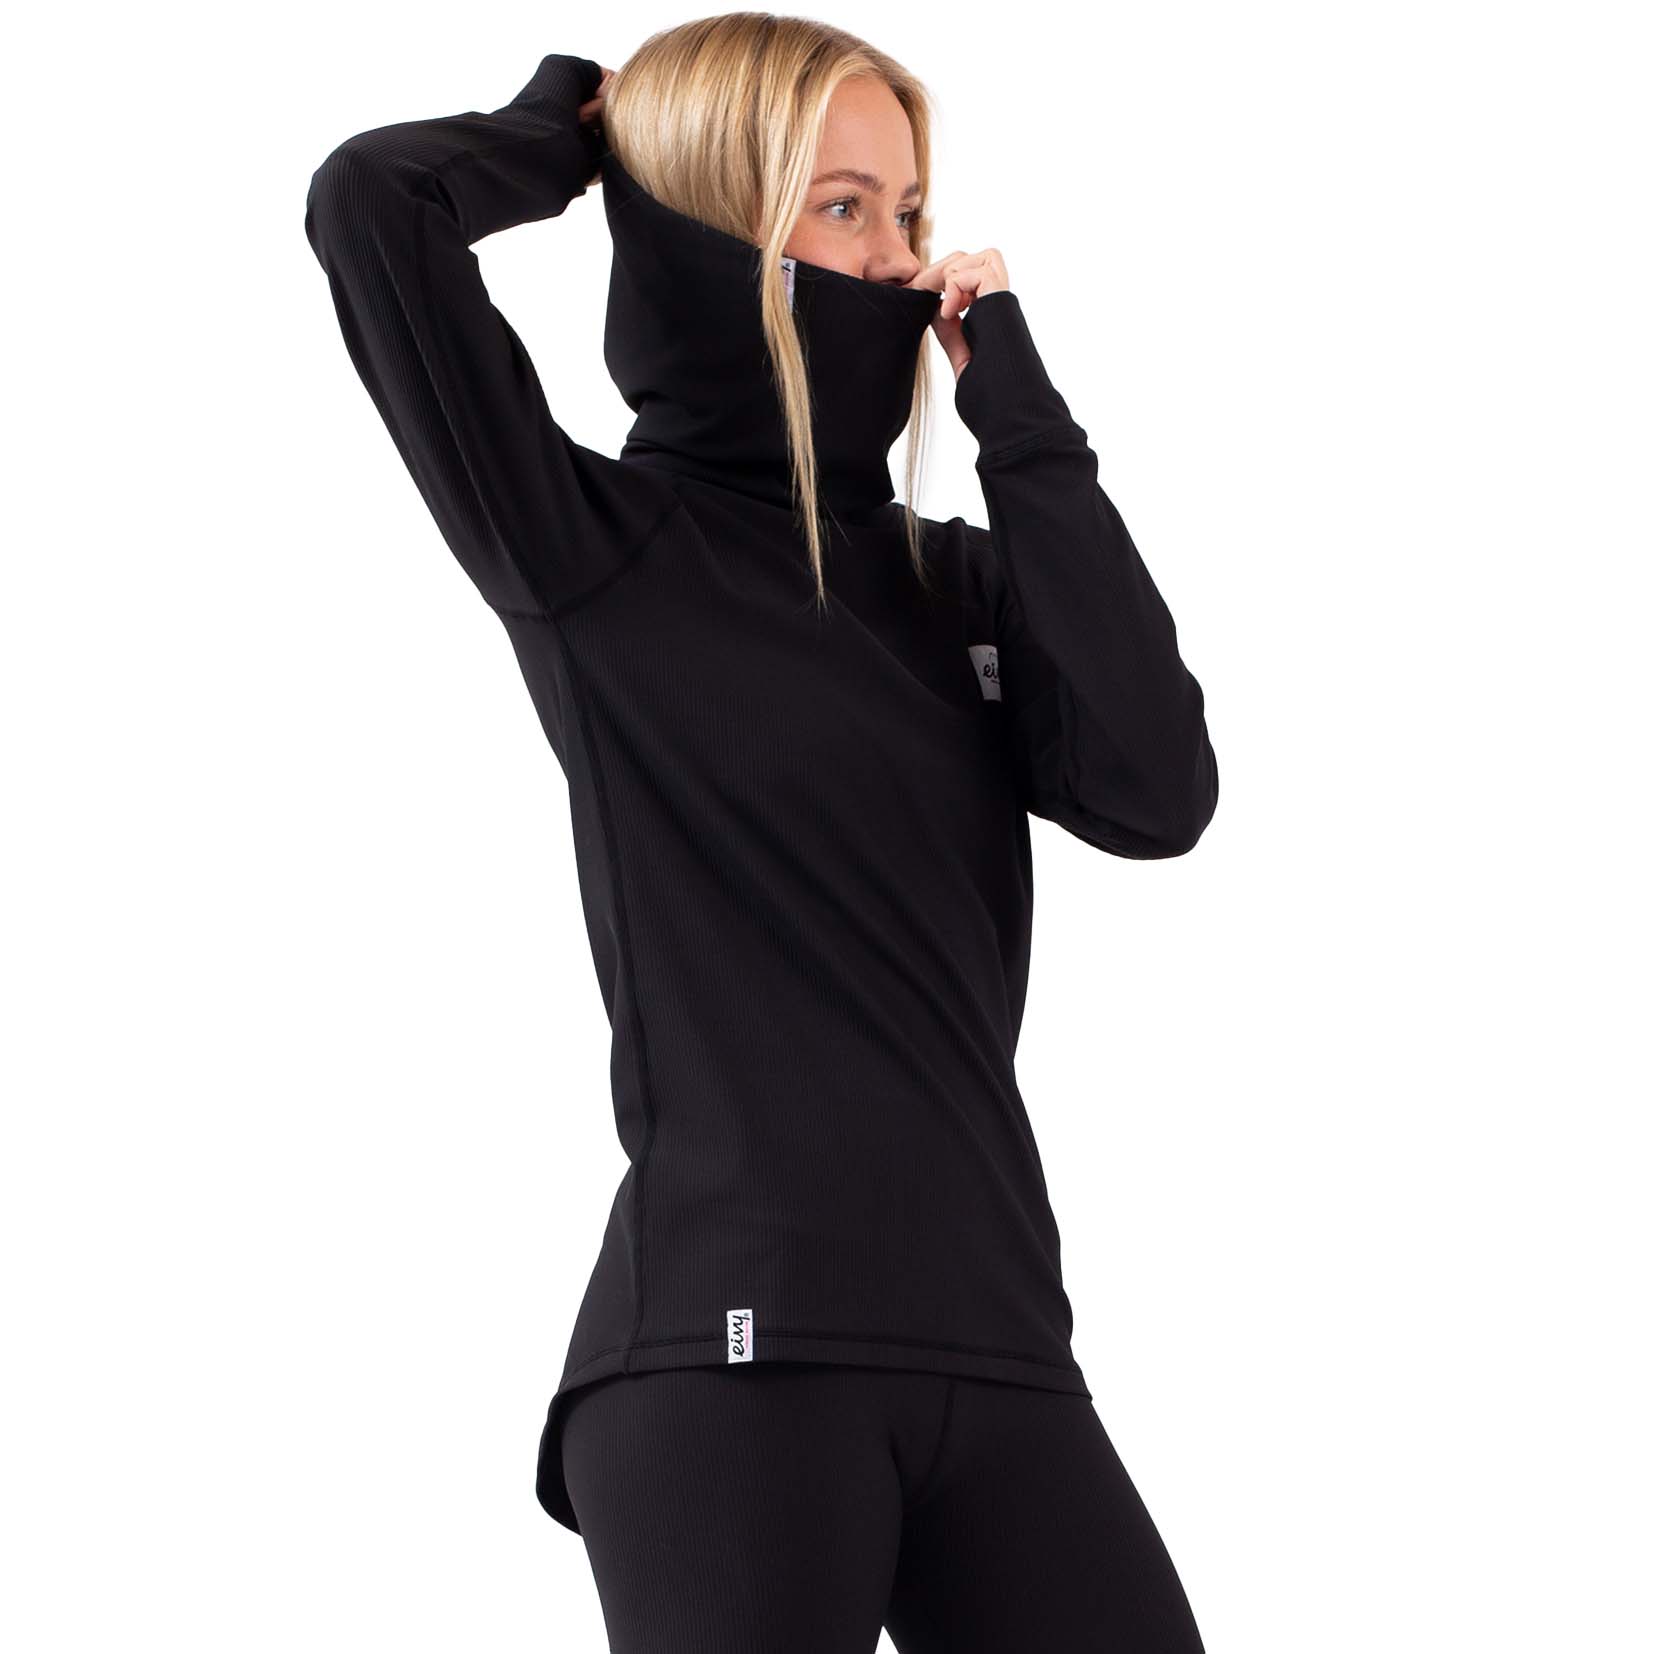 Eivy Icecold Gaiter Rib Top Women's Thermal Baselayer 